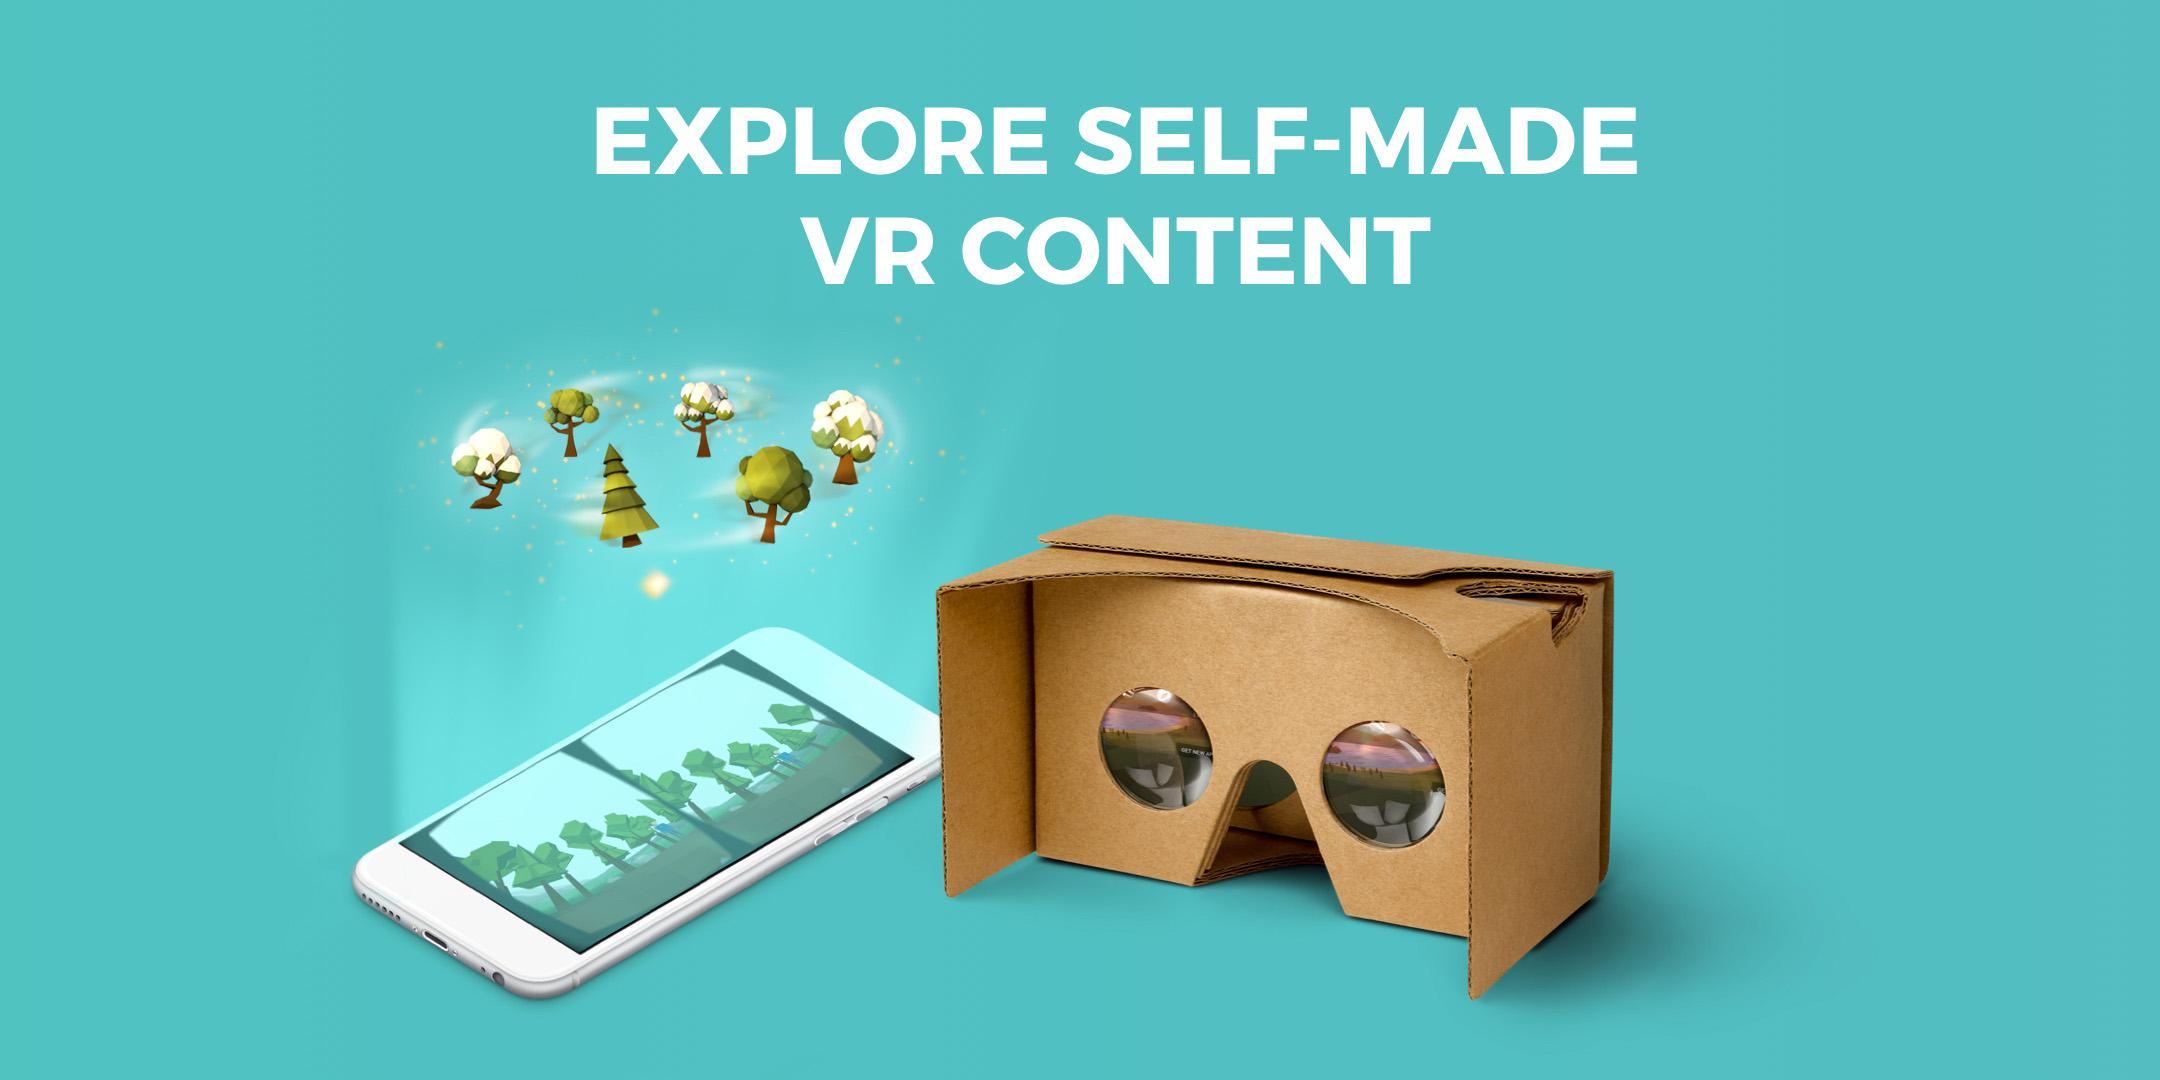 Cospaces Maker Make Your Own Virtual Worlds For Android - make your own sonic house roblox